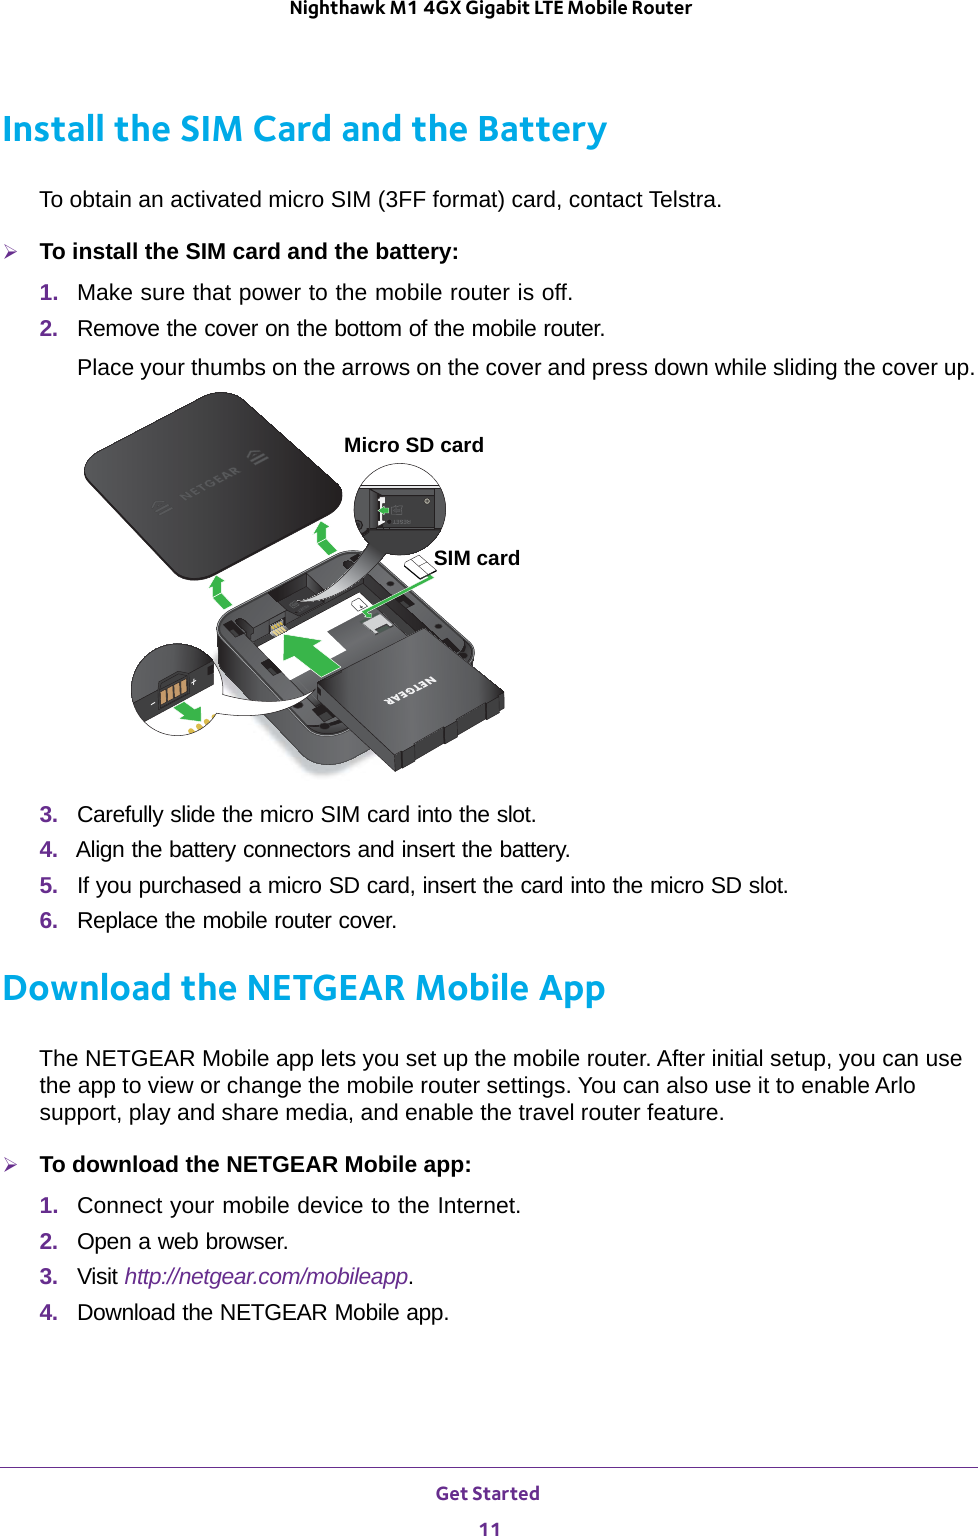 Get Started 11 Nighthawk M1 4GX Gigabit LTE Mobile RouterInstall the SIM Card and the BatteryTo obtain an activated micro SIM (3FF format) card, contact Telstra.To install the SIM card and the battery:1.  Make sure that power to the mobile router is off.2.  Remove the cover on the bottom of the mobile router. Place your thumbs on the arrows on the cover and press down while sliding the cover up.SIM cardMicro SD card3.  Carefully slide the micro SIM card into the slot.4.  Align the battery connectors and insert the battery.5.  If you purchased a micro SD card, insert the card into the micro SD slot.6.  Replace the mobile router cover.Download the NETGEAR Mobile AppThe NETGEAR Mobile app lets you set up the mobile router. After initial setup, you can use the app to view or change the mobile router settings. You can also use it to enable Arlo support, play and share media, and enable the travel router feature.To download the NETGEAR Mobile app:1.  Connect your mobile device to the Internet.2.  Open a web browser.3.  Visit http://netgear.com/mobileapp.4.  Download the NETGEAR Mobile app.